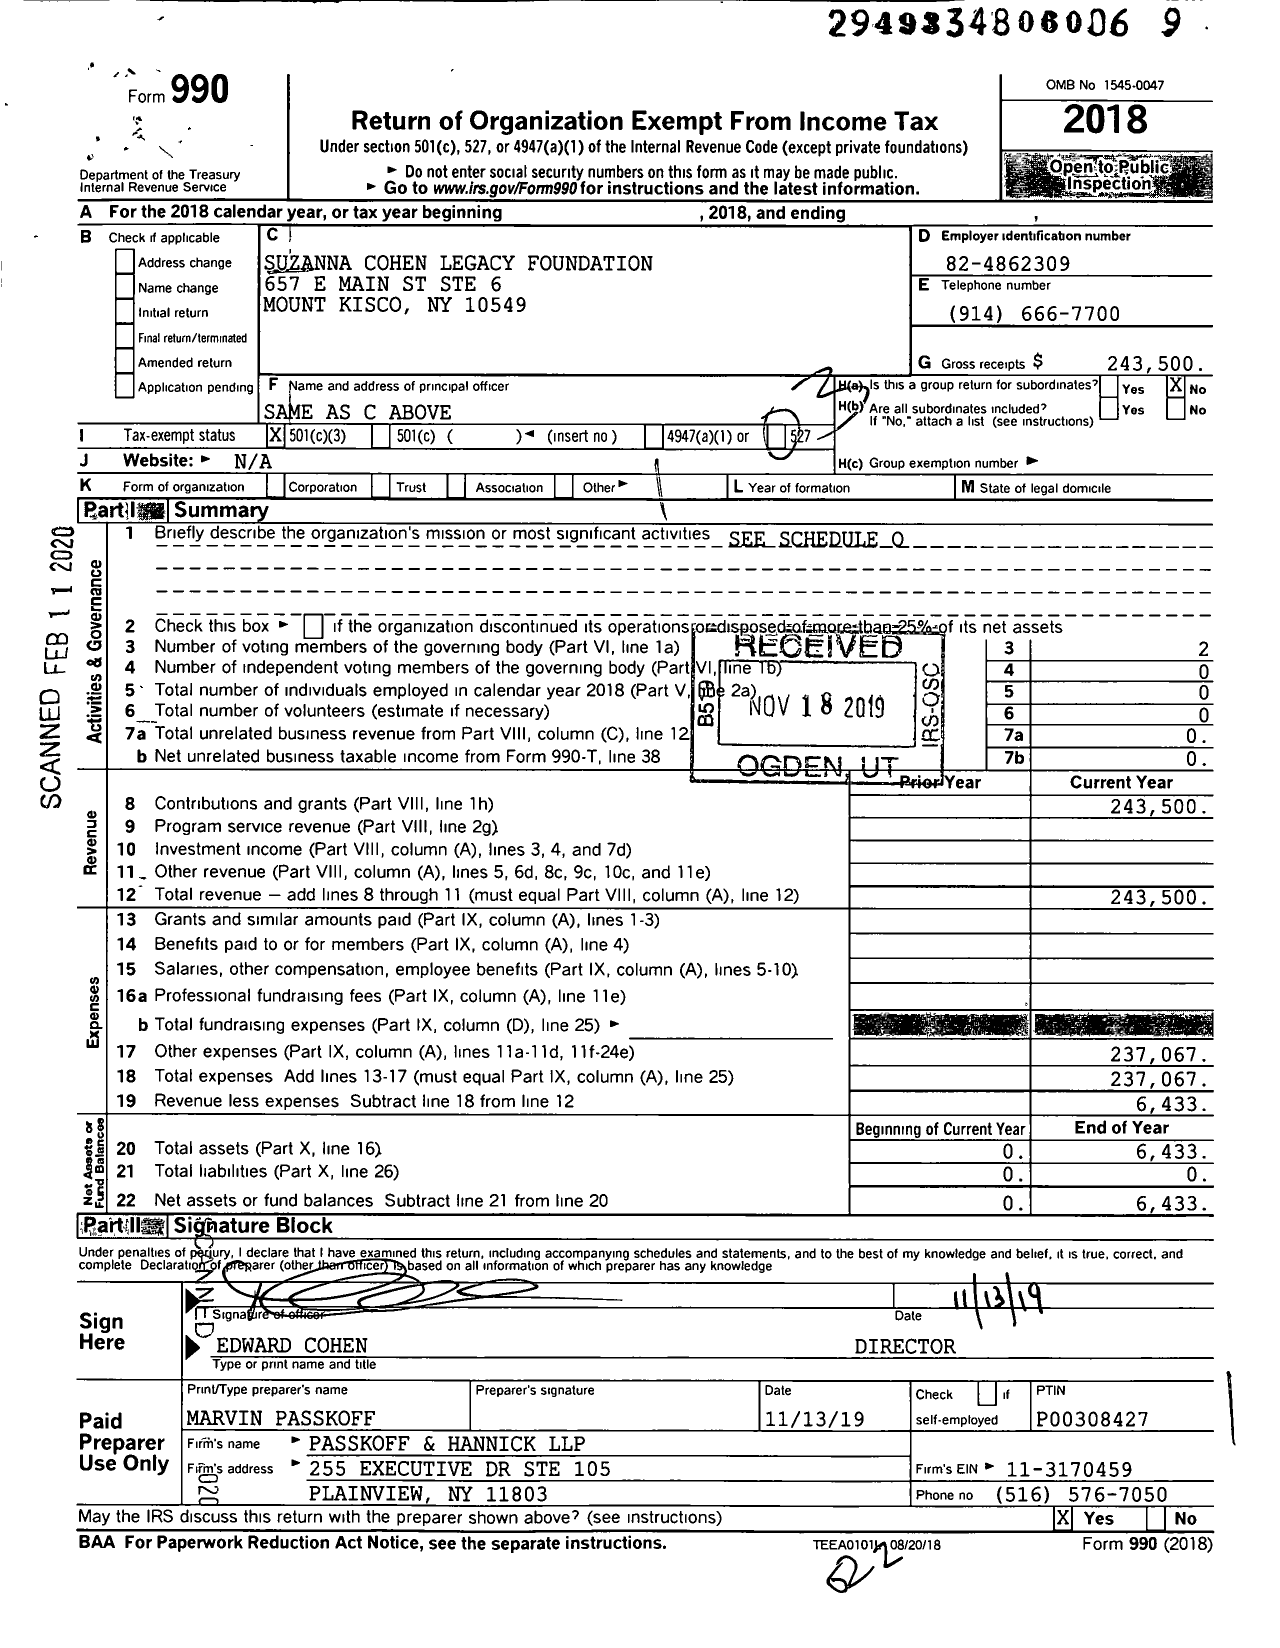 Image of first page of 2018 Form 990 for Suzanna Cohen Legacy Foundation